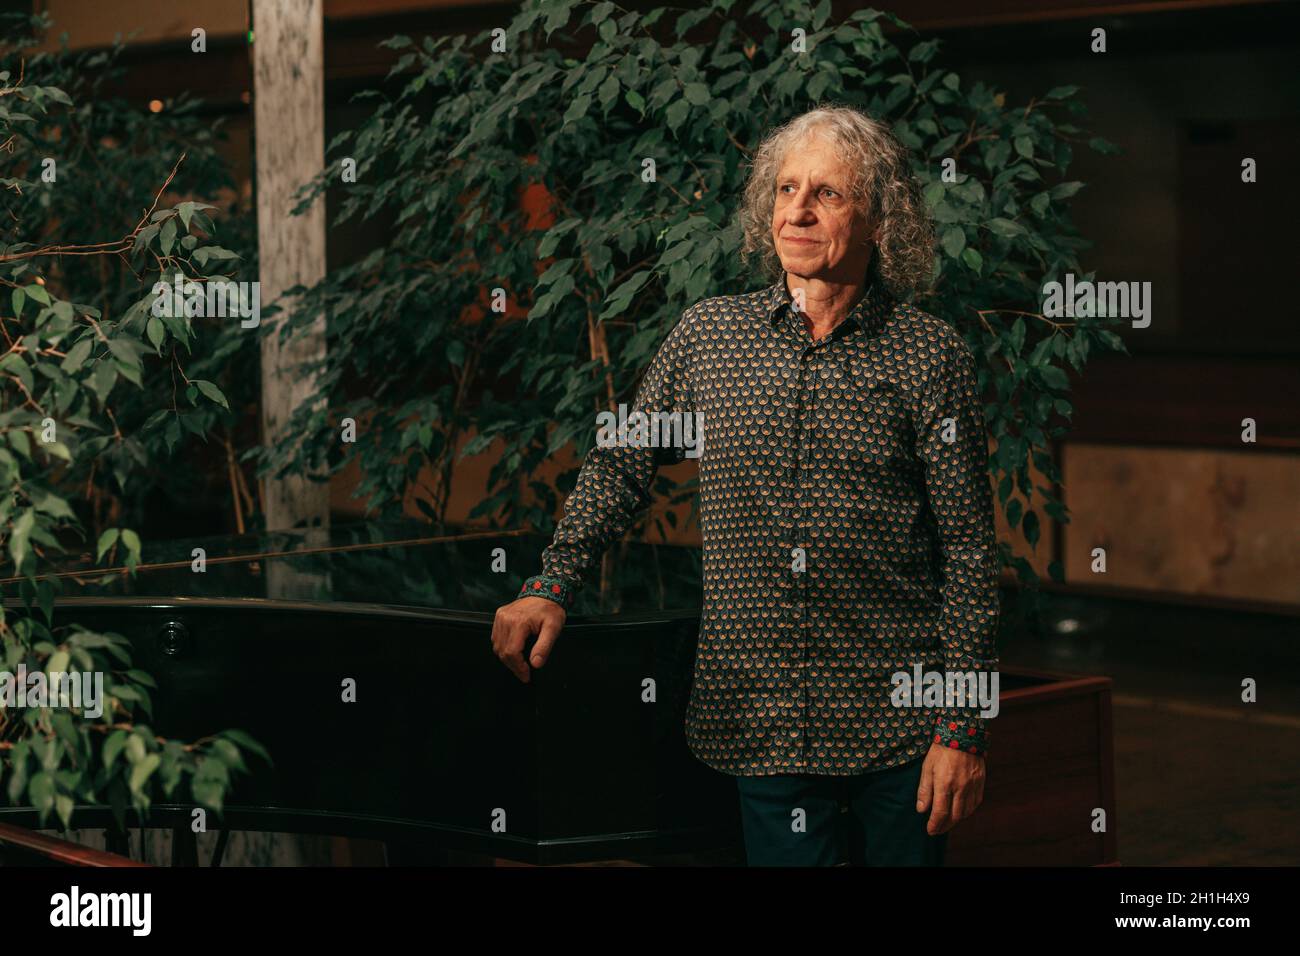 portrait of 65-year-old man at piano musical instrument in lobby of hotel among green trees gray curly hair, charismatic appearance Stock Photo